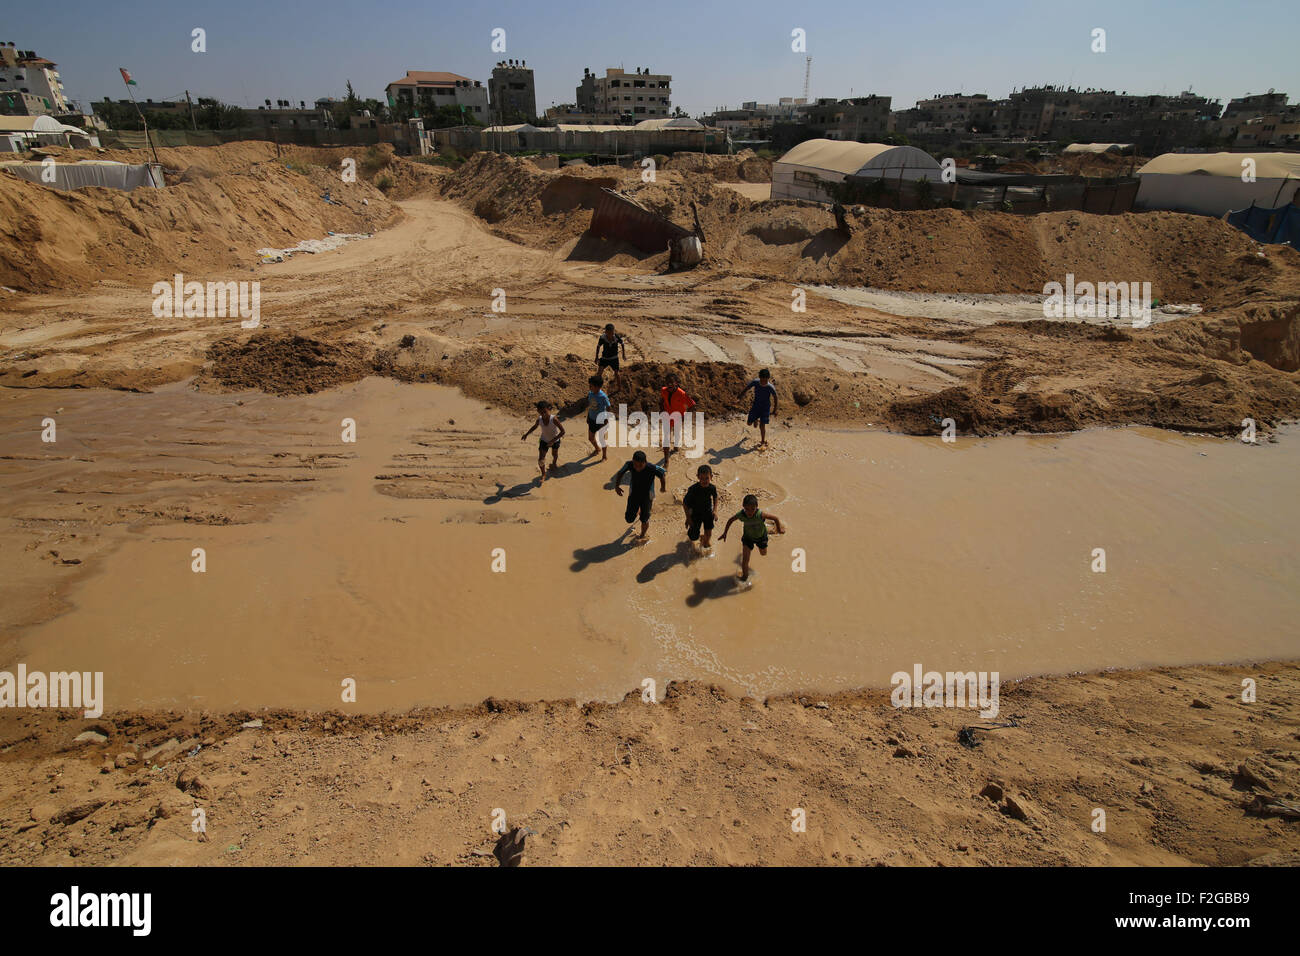 Gaza, Gaza Strip city of Rafah. 18th Sep, 2015. Palestinian children play in the water after Egyptian forces flooded smuggling tunnels dug beneath the Gaza-Egypt border, in the southern Gaza Strip city of Rafah, on Sept. 18, 2015. According to Palestinian witnesses, the Egyptian authorities pumped water from the Mediterranean Sea through pipes to destroy the tunnels. © Khaled Omar/Xinhua/Alamy Live News Stock Photo